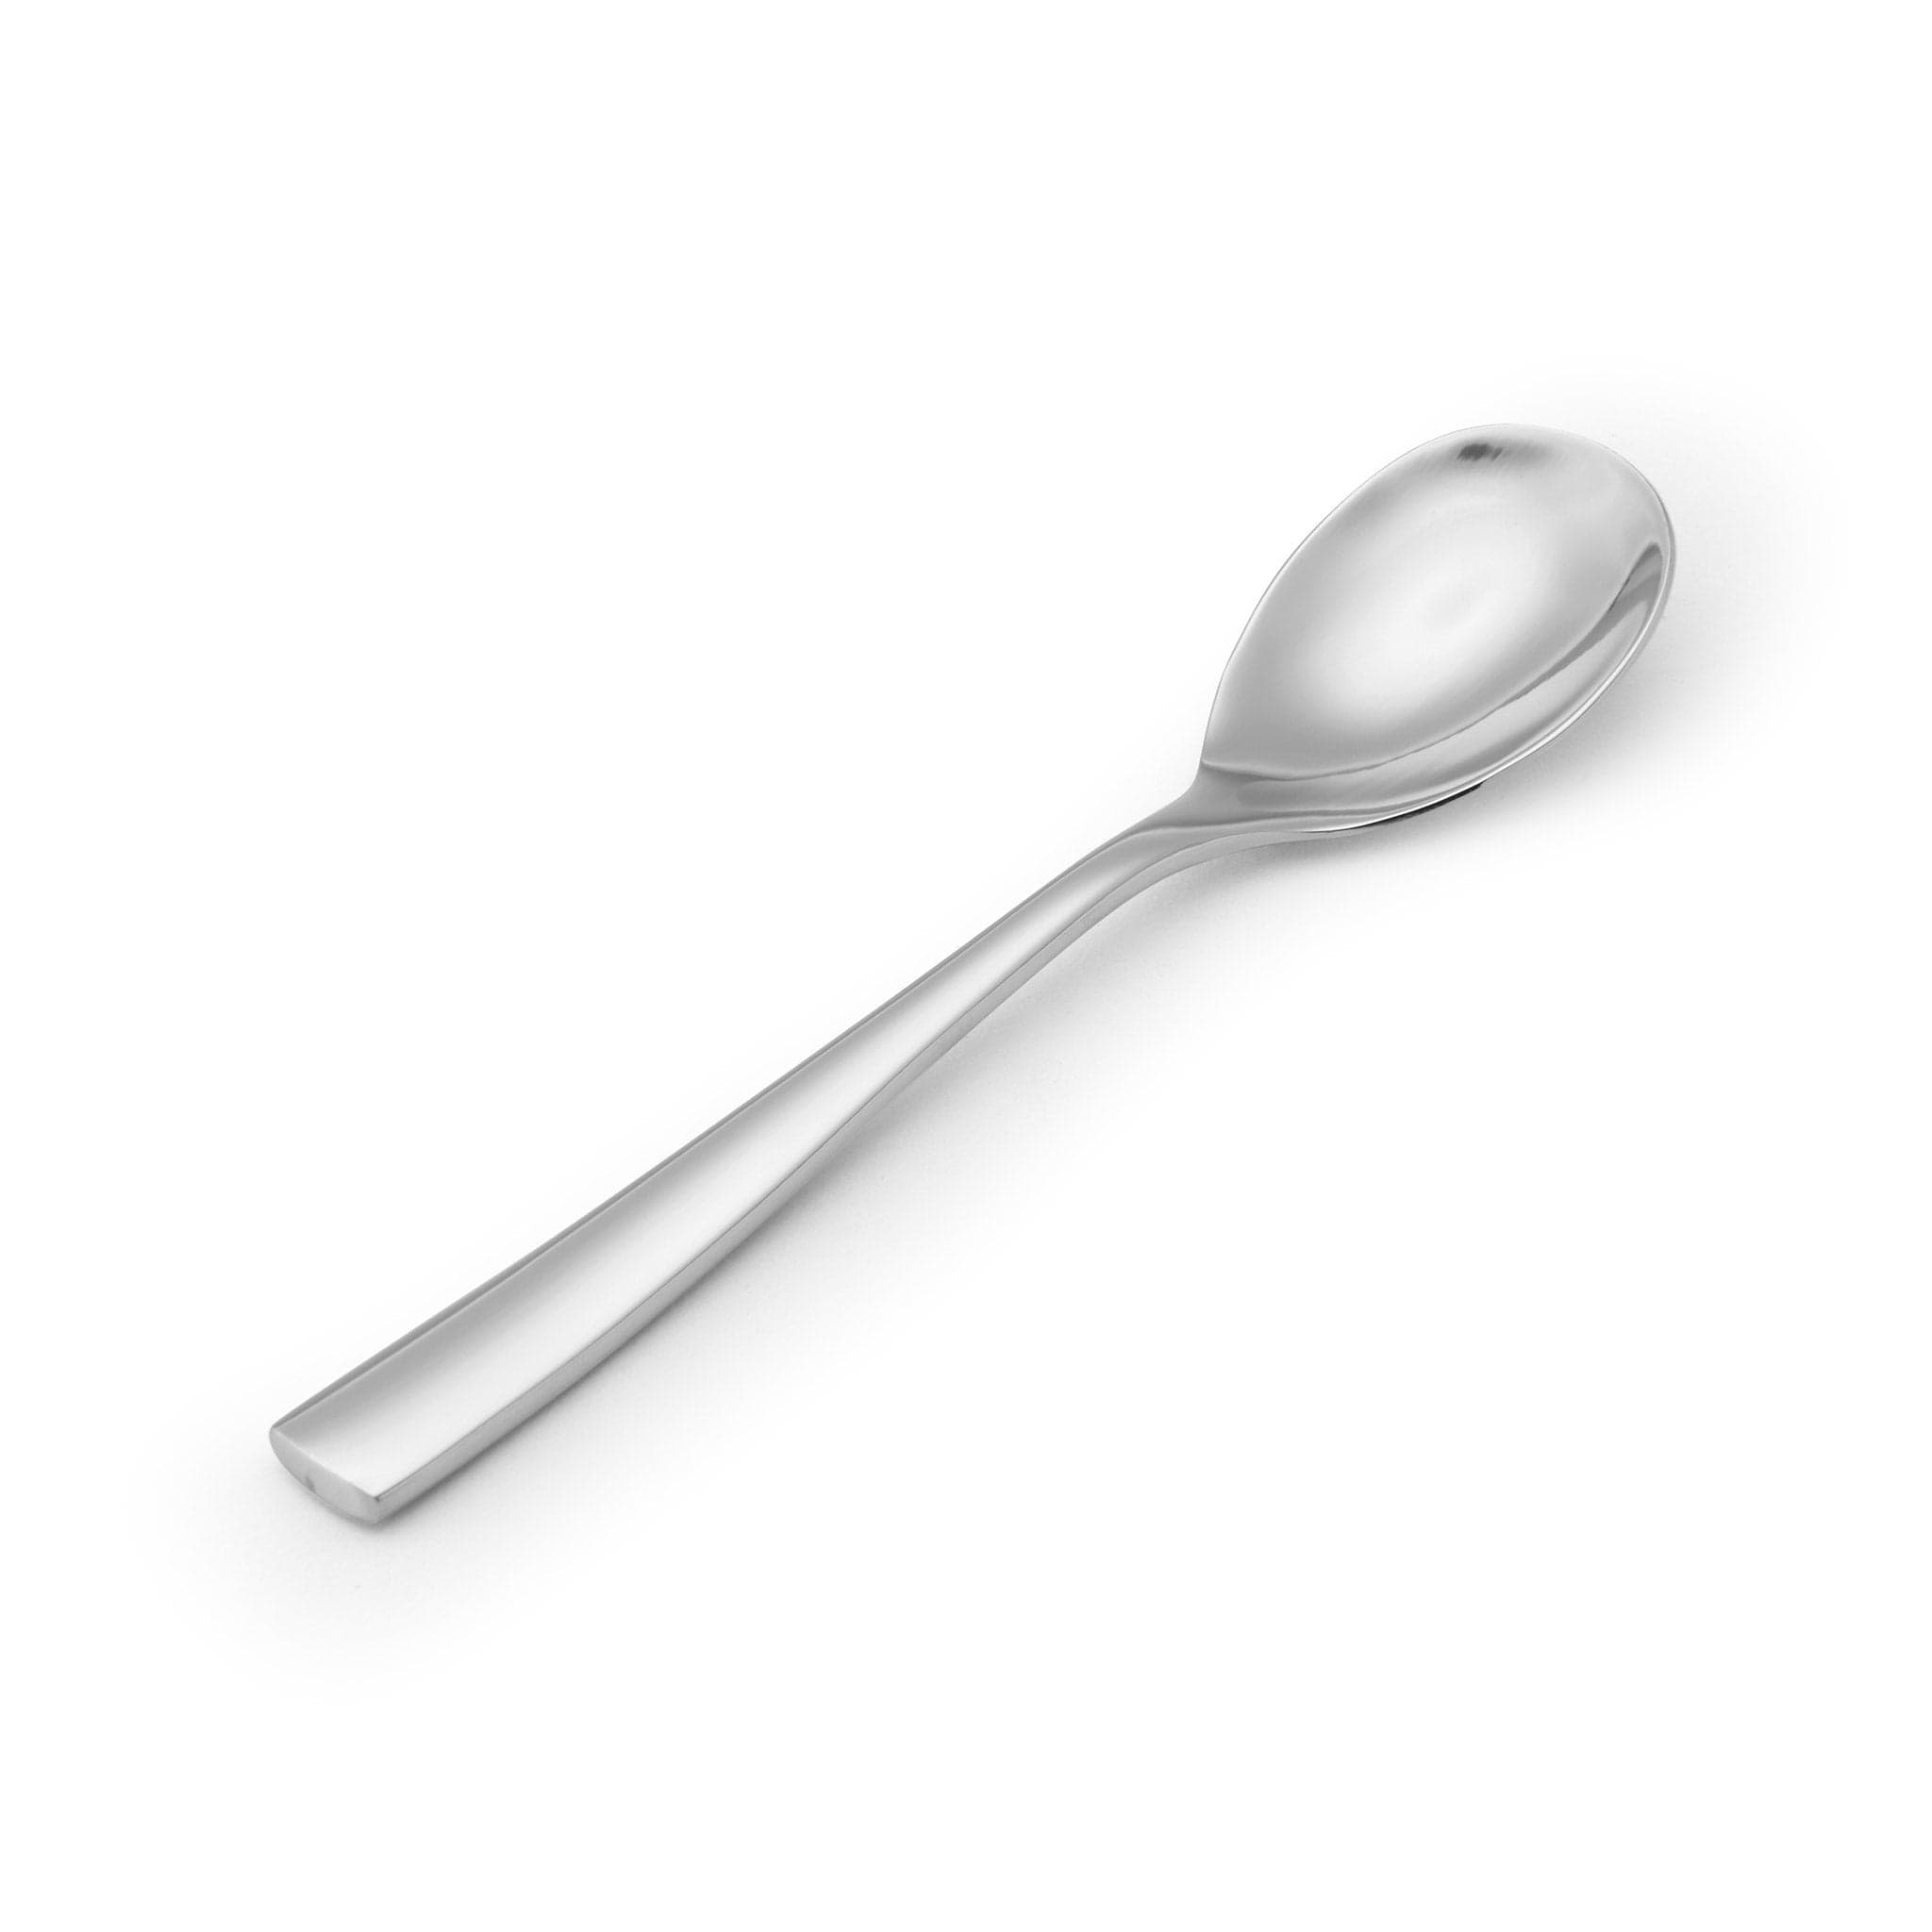 Delano 18/10 Coffee Spoon 6.7" Stainless Steel